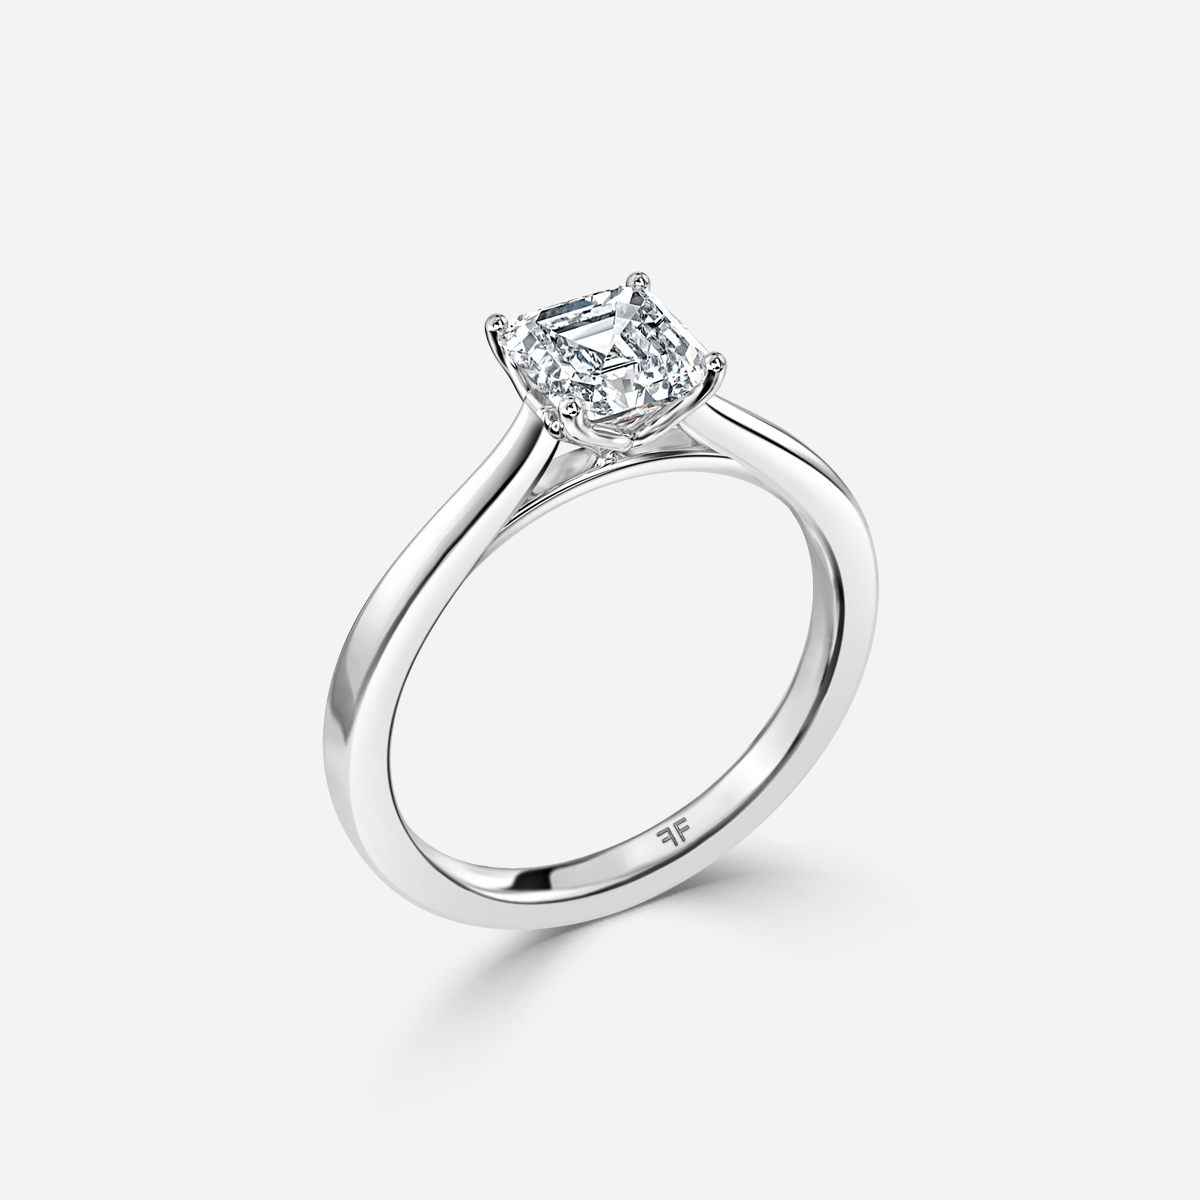 White Gold Petite Solitaire Engagement Ring